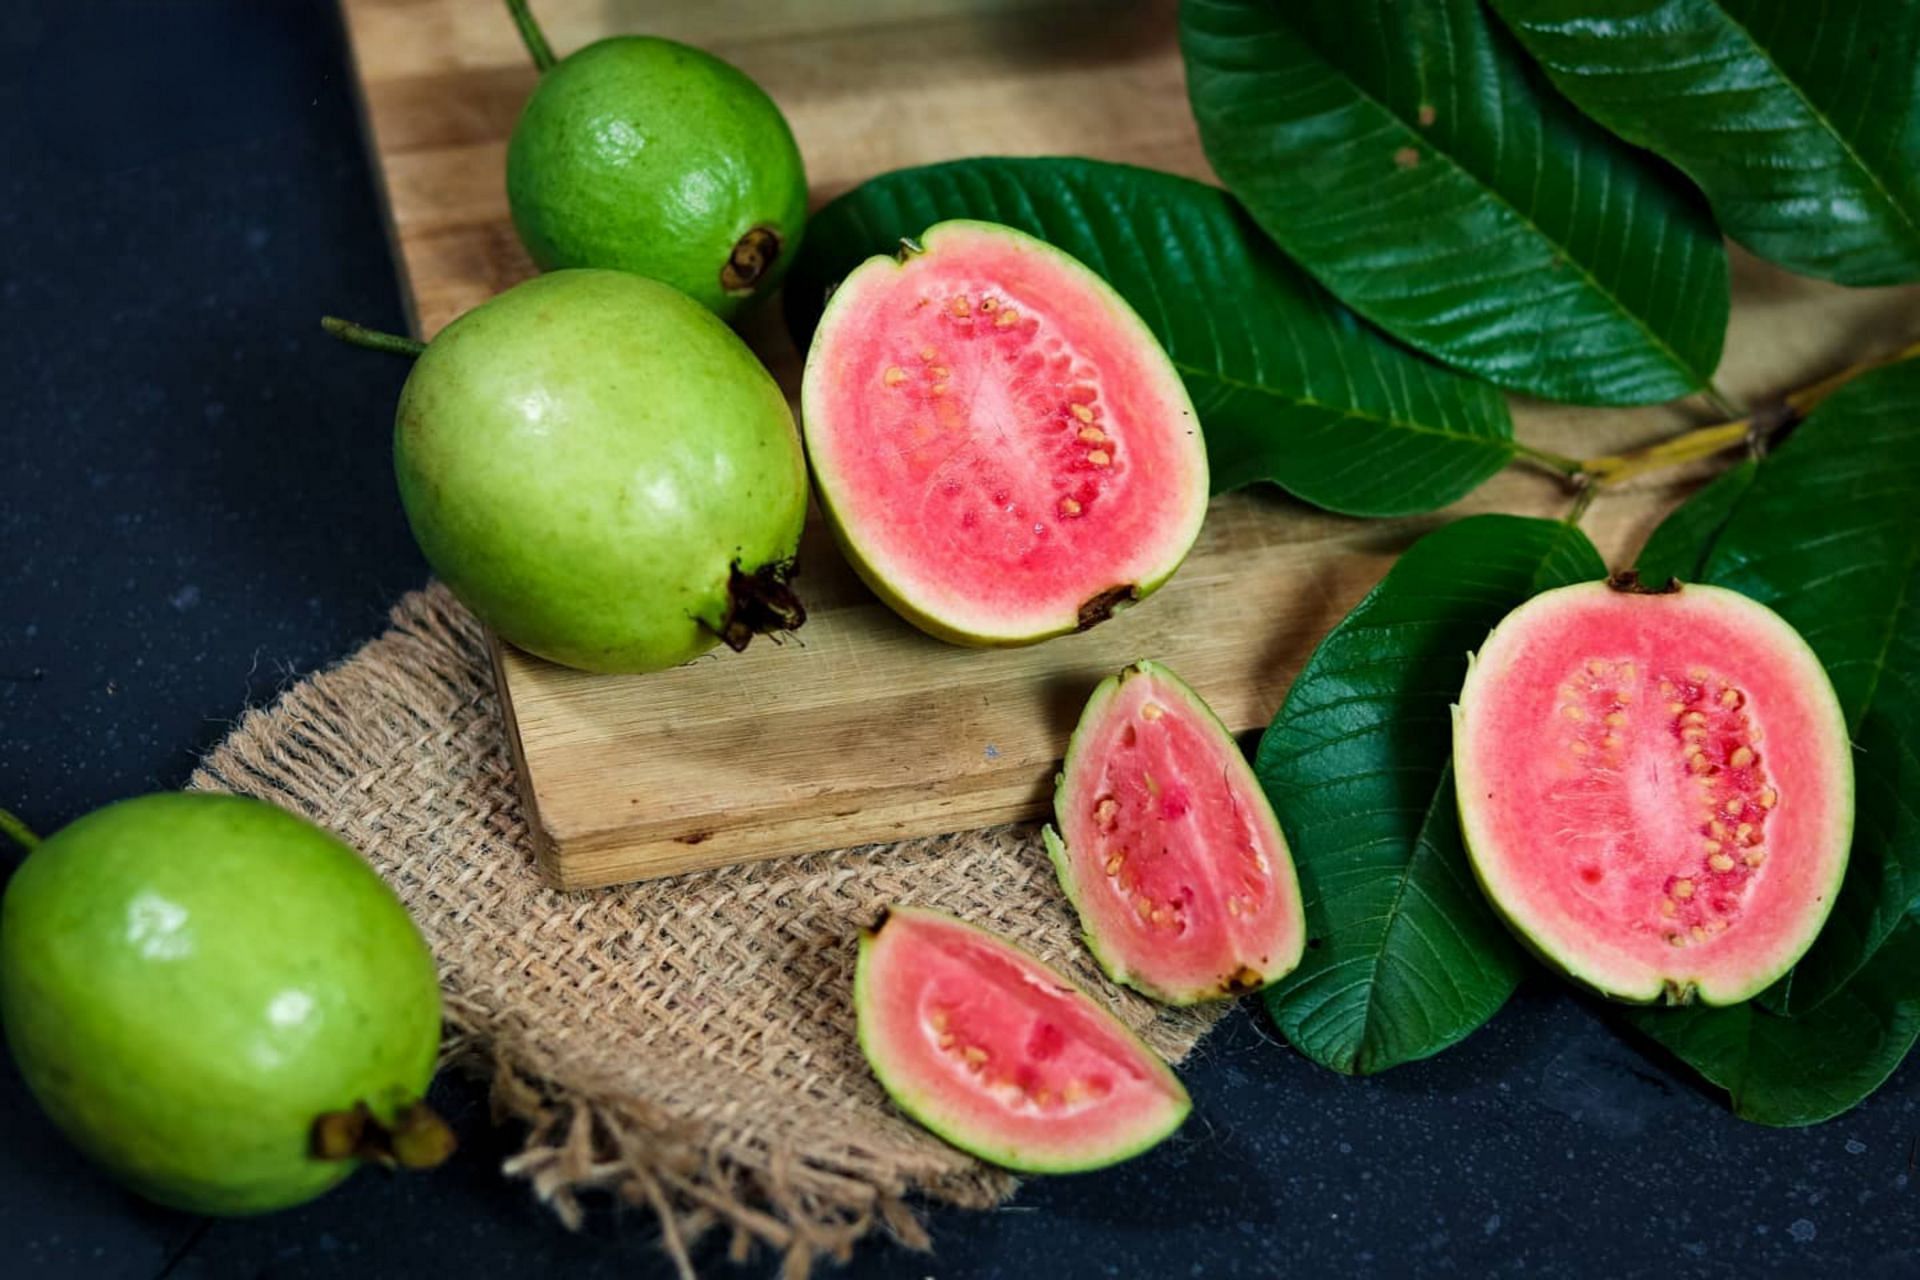 Guava, a tropical fruit with a distinctive flavor, is one of the healthiest fruits you can consume (Image via Pexels)